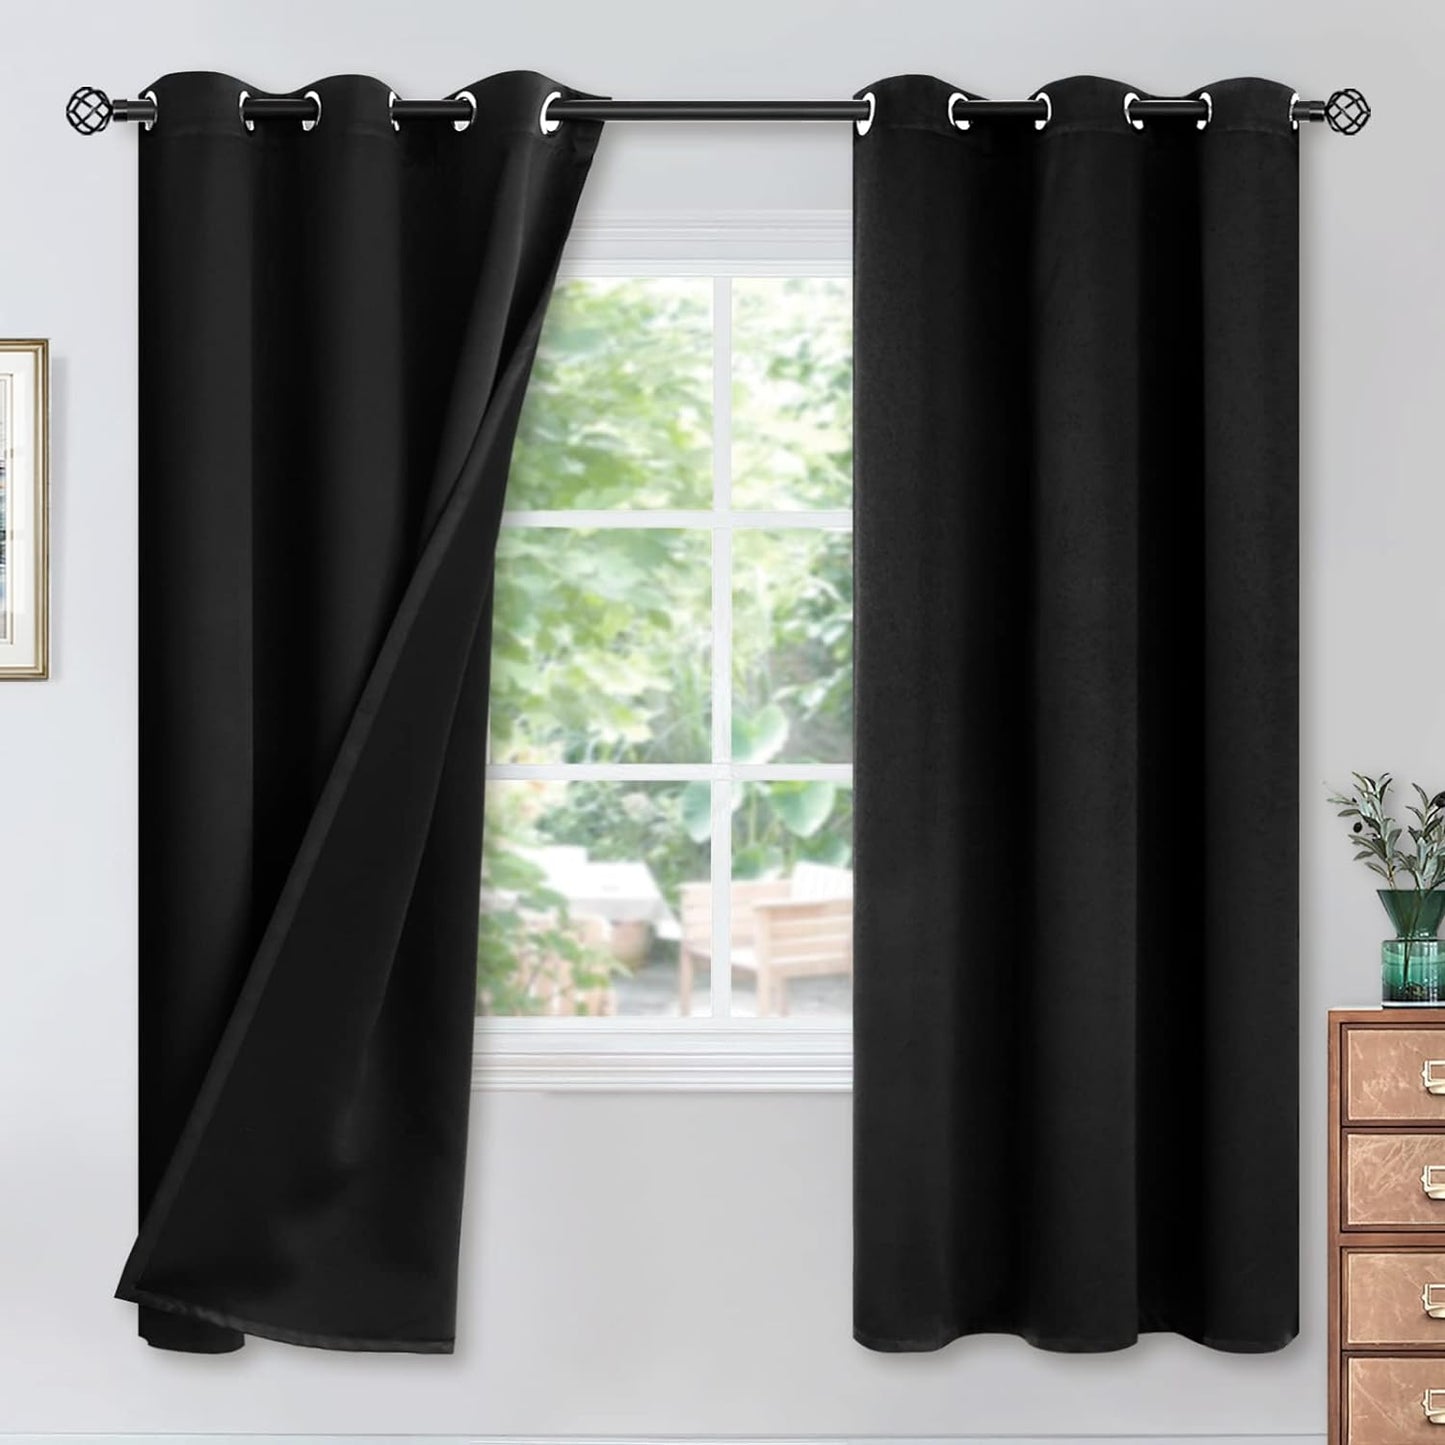 Youngstex Black 100% Blackout Curtains 63 Inches for Bedroom Thermal Insulated Total Room Darkening Curtains for Living Room Window with Black Back Grommet, 2 Panels, 42 X 63 Inch  YoungsTex Black 42W X 72L 